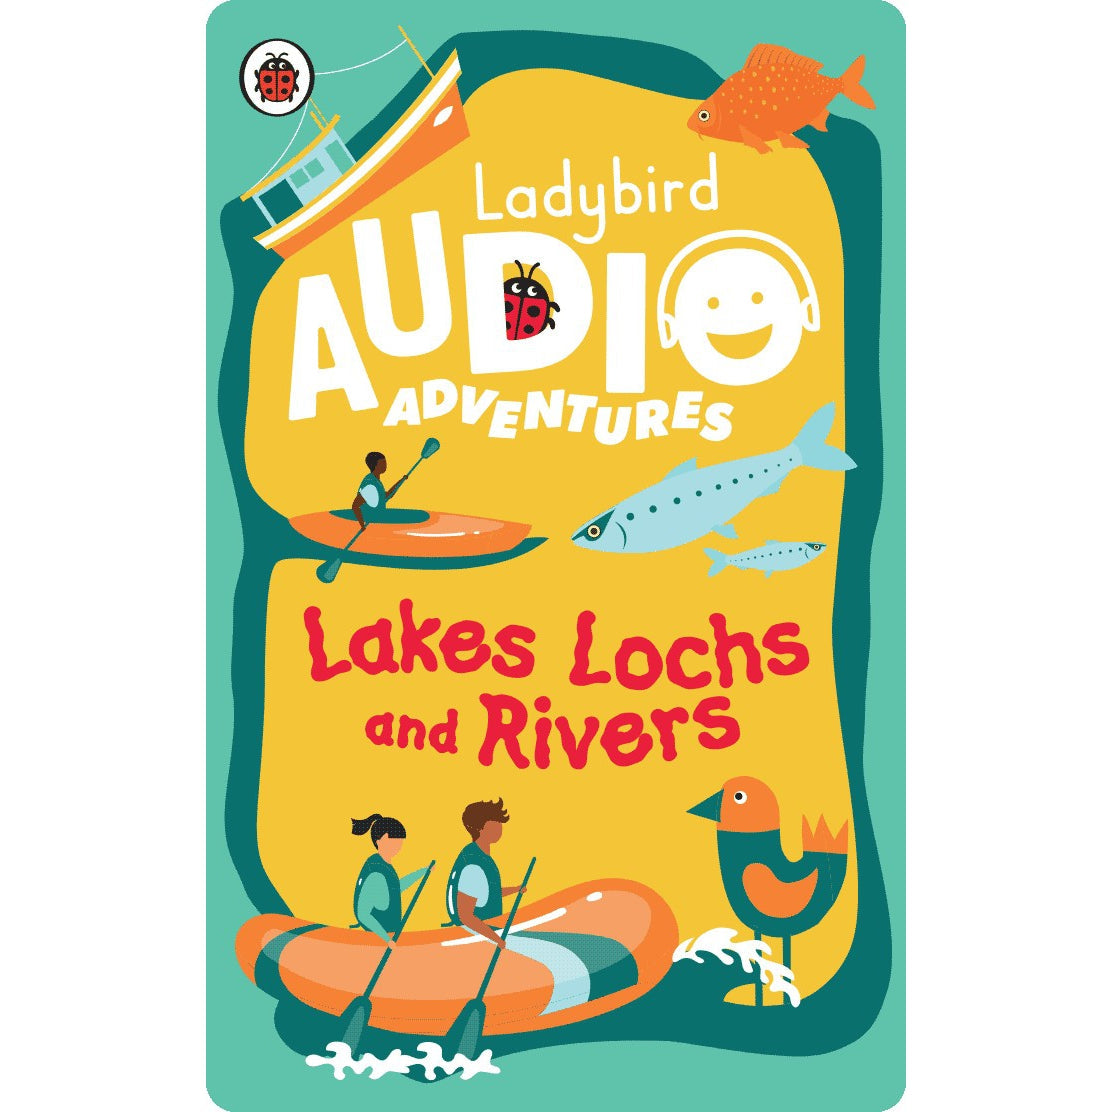 Yoto Card - Lakes Lochs and Rivers (Ladybird Audio Adventures) - Child Friendly Audio Story Card for the Yoto Player